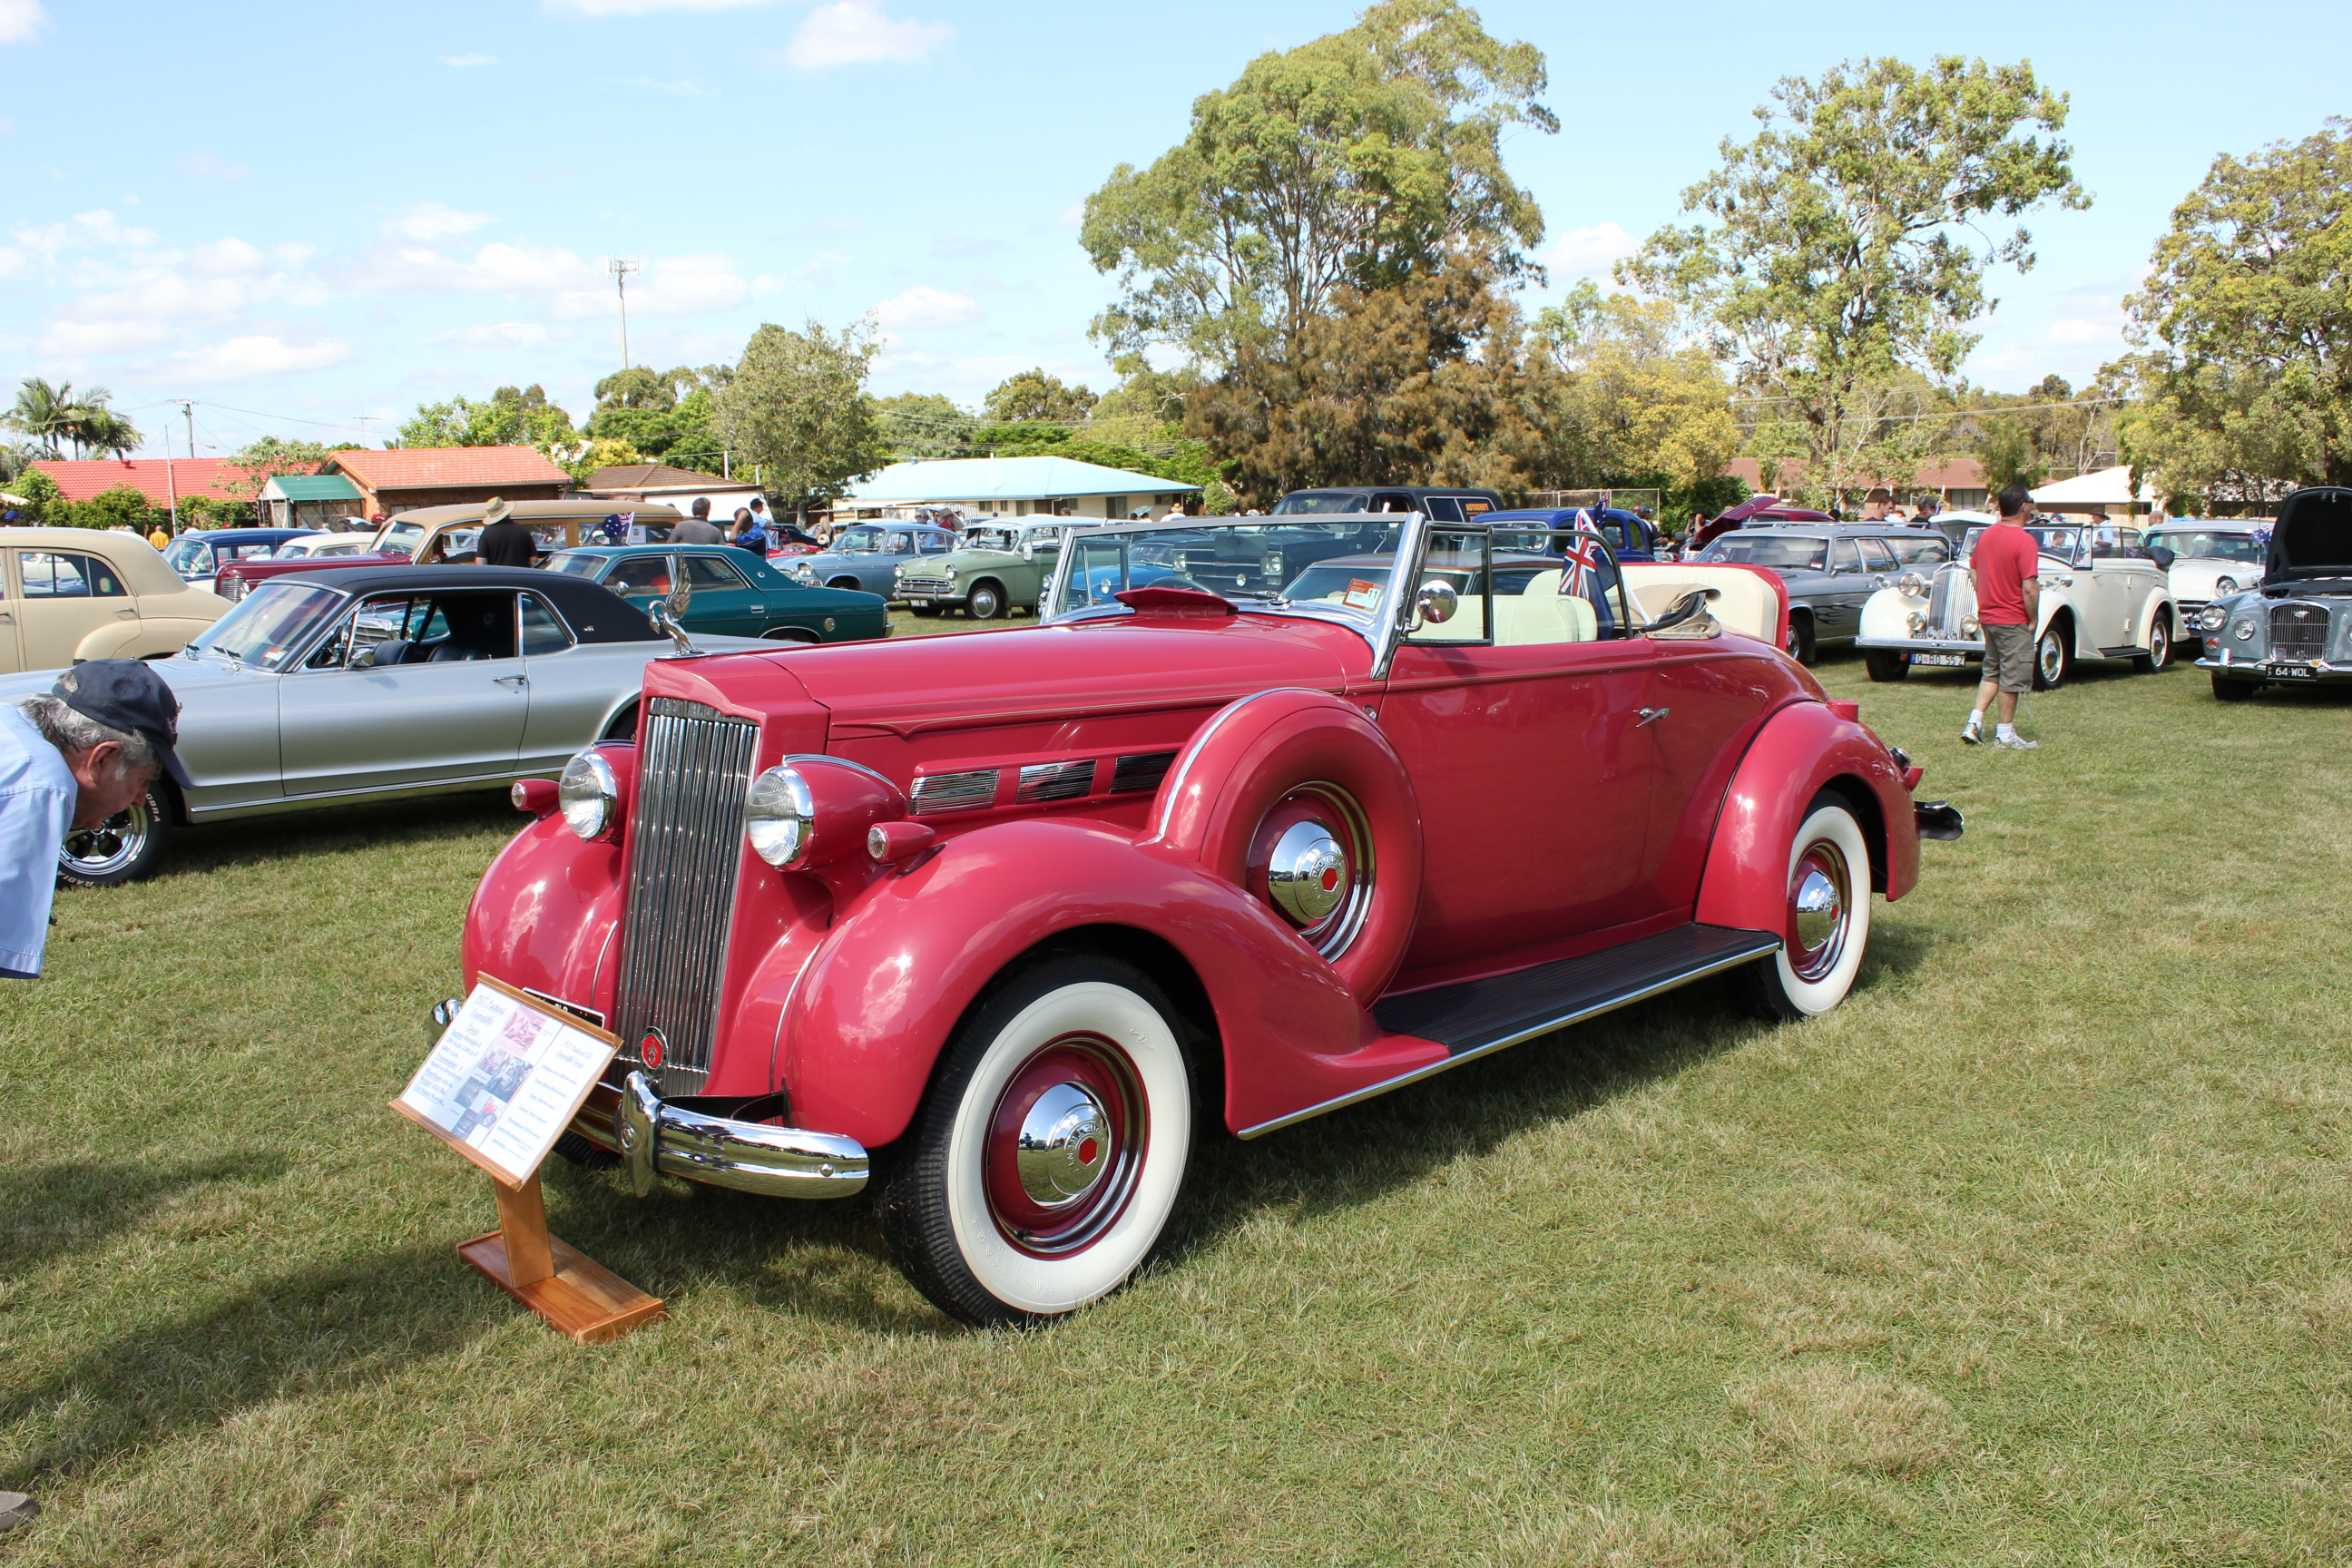 File:1937 Packard Convertible Coupe.JPG - Wikimedia Commons